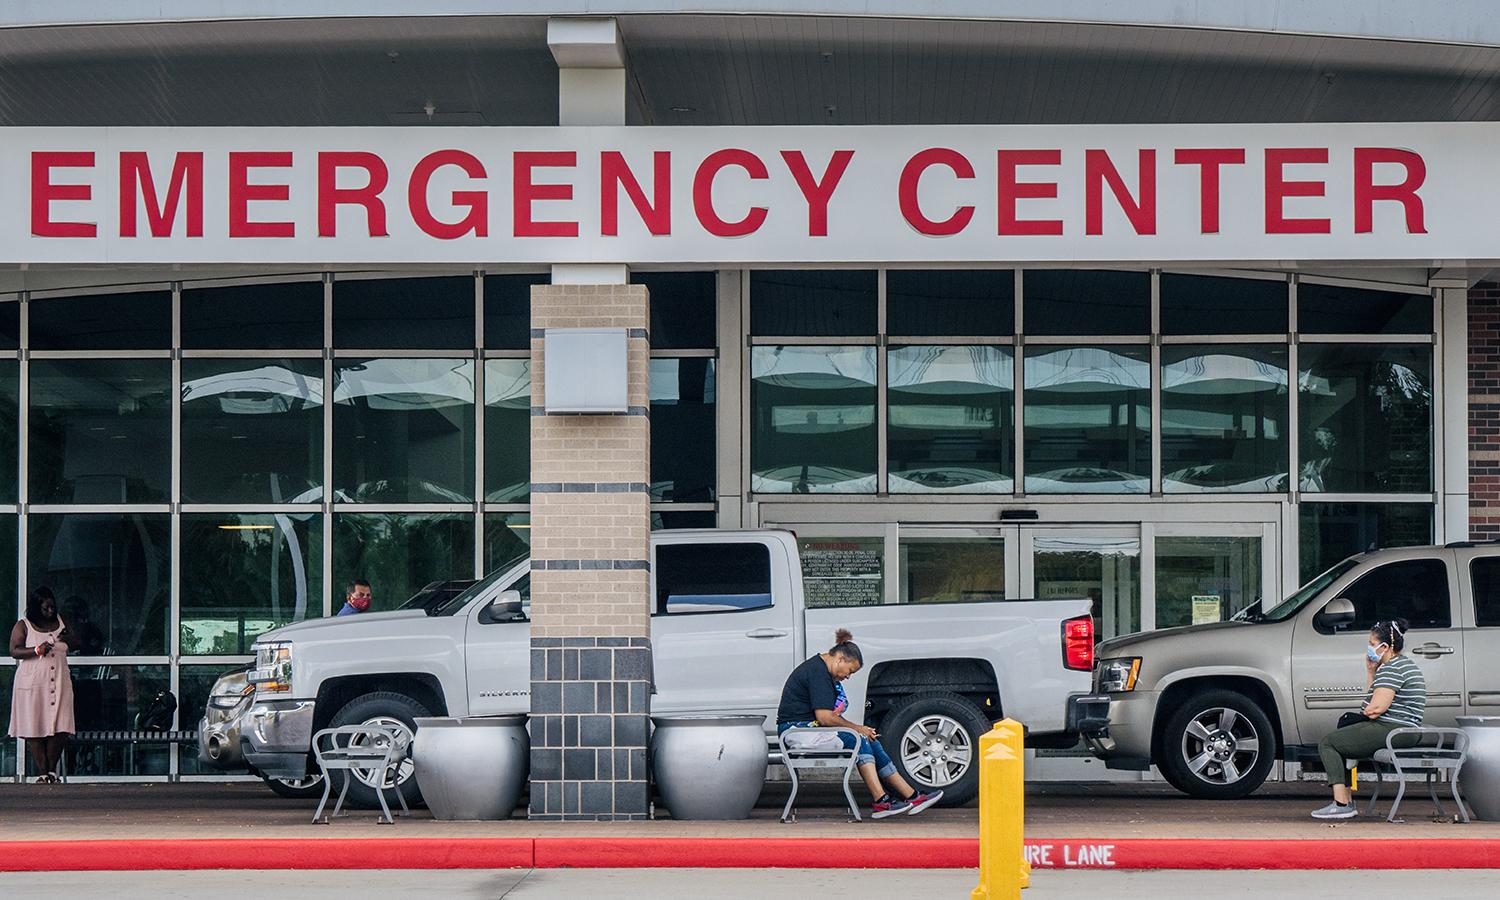 The outside of a hospital emergency center is seen.